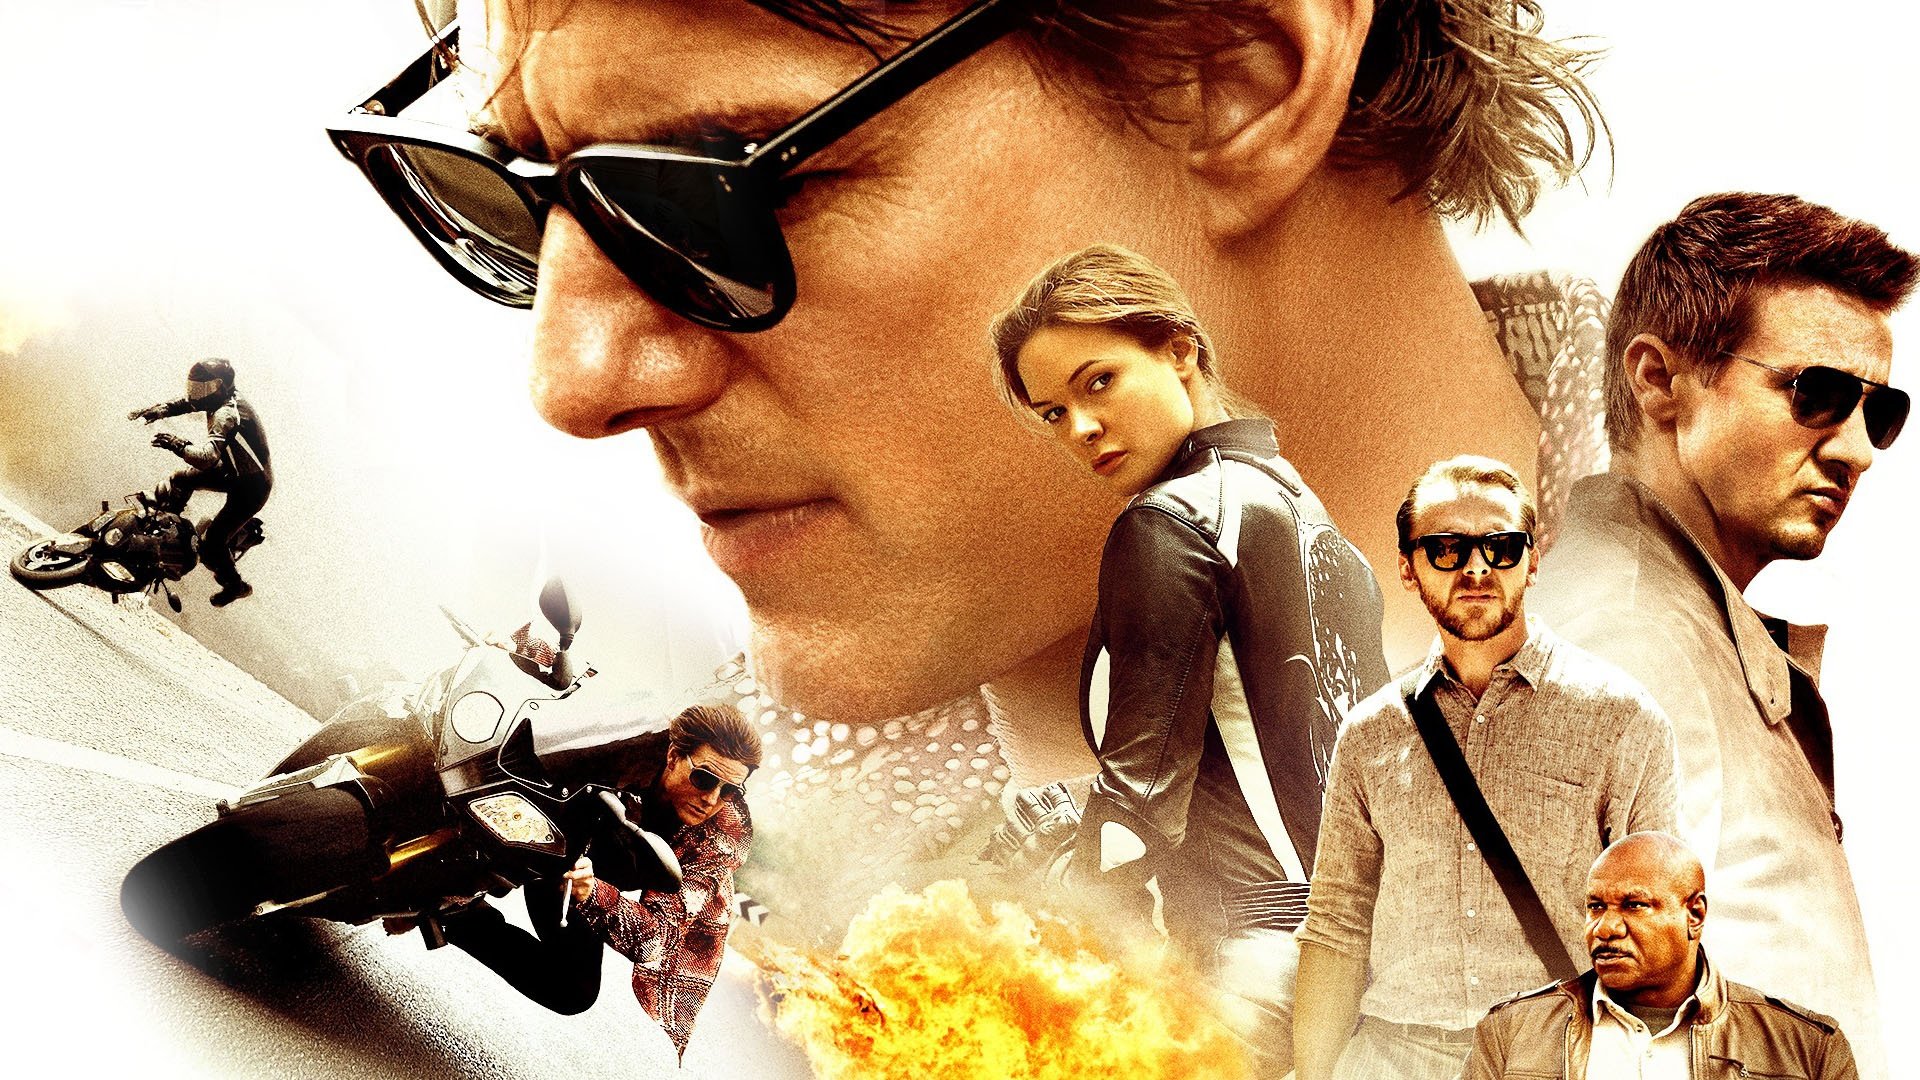 mission impossible 3 movie online